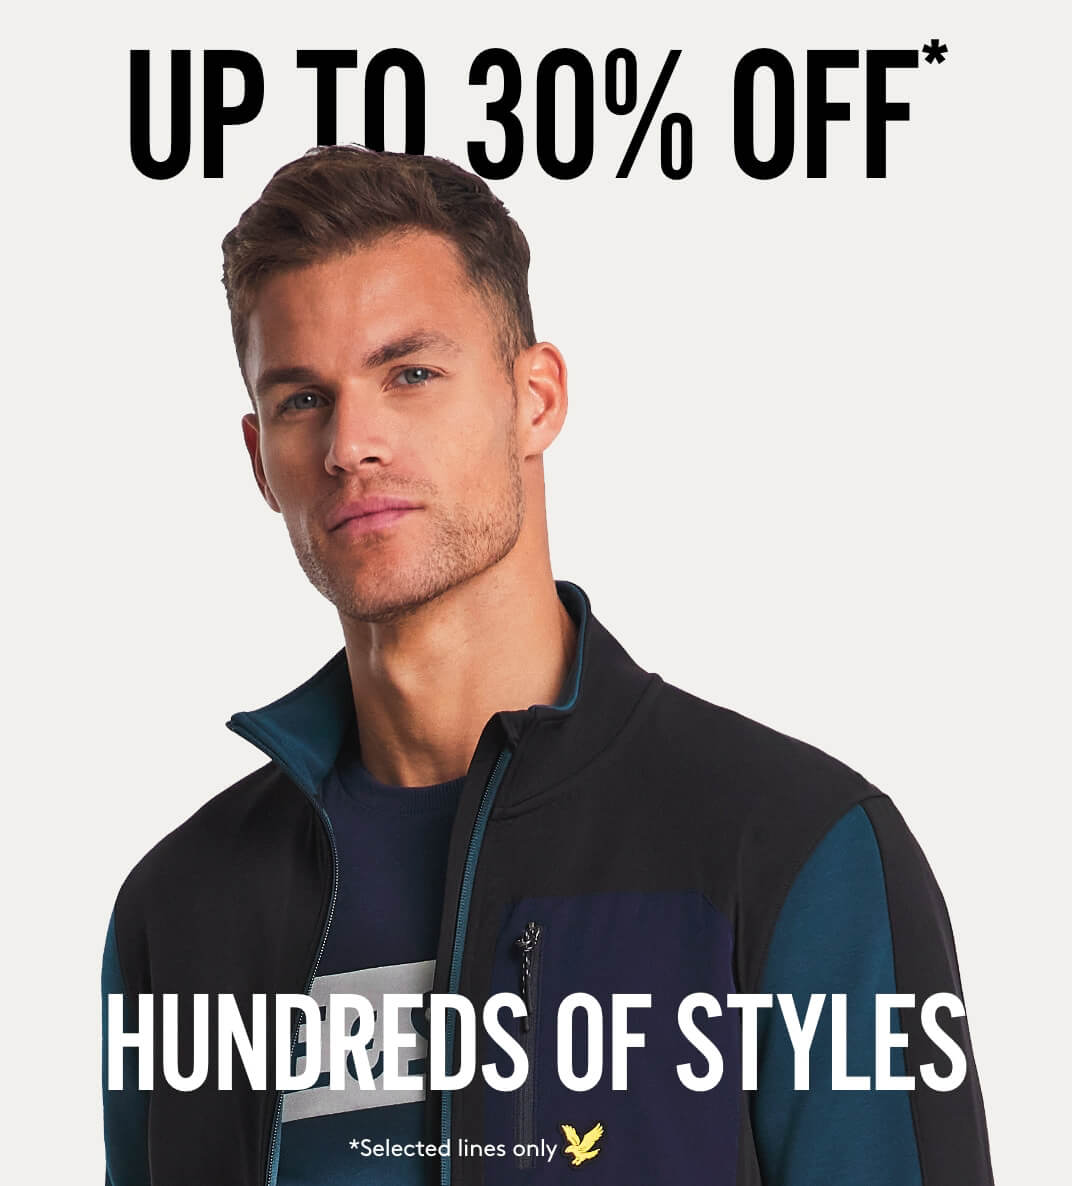 Up to 30% off* Hundreds of styles